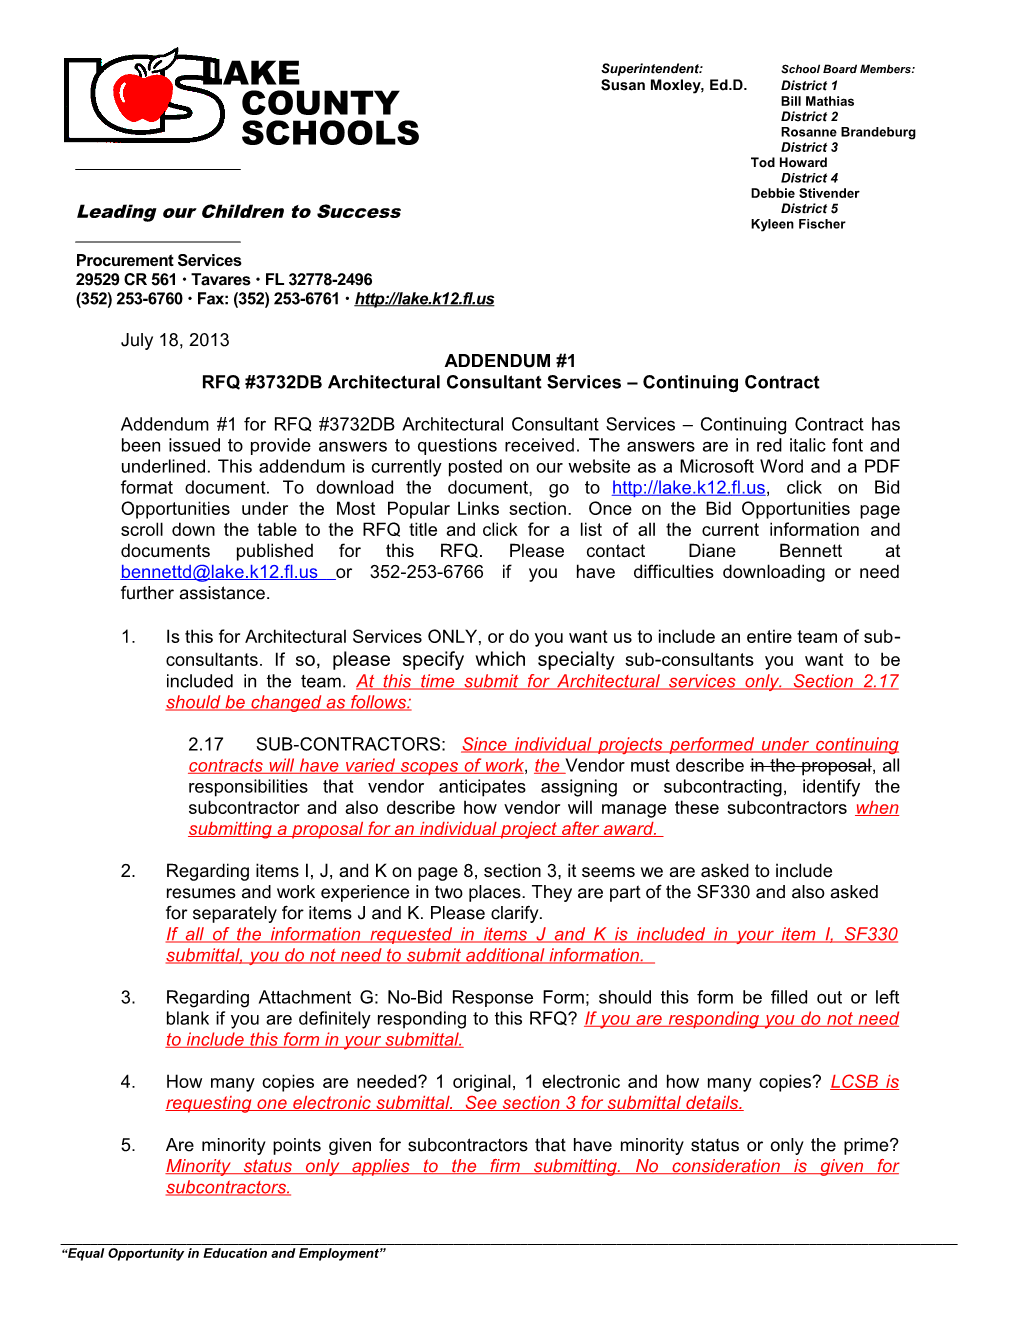 RFQ #3732DB Architectural Consultant Services Continuing Contract